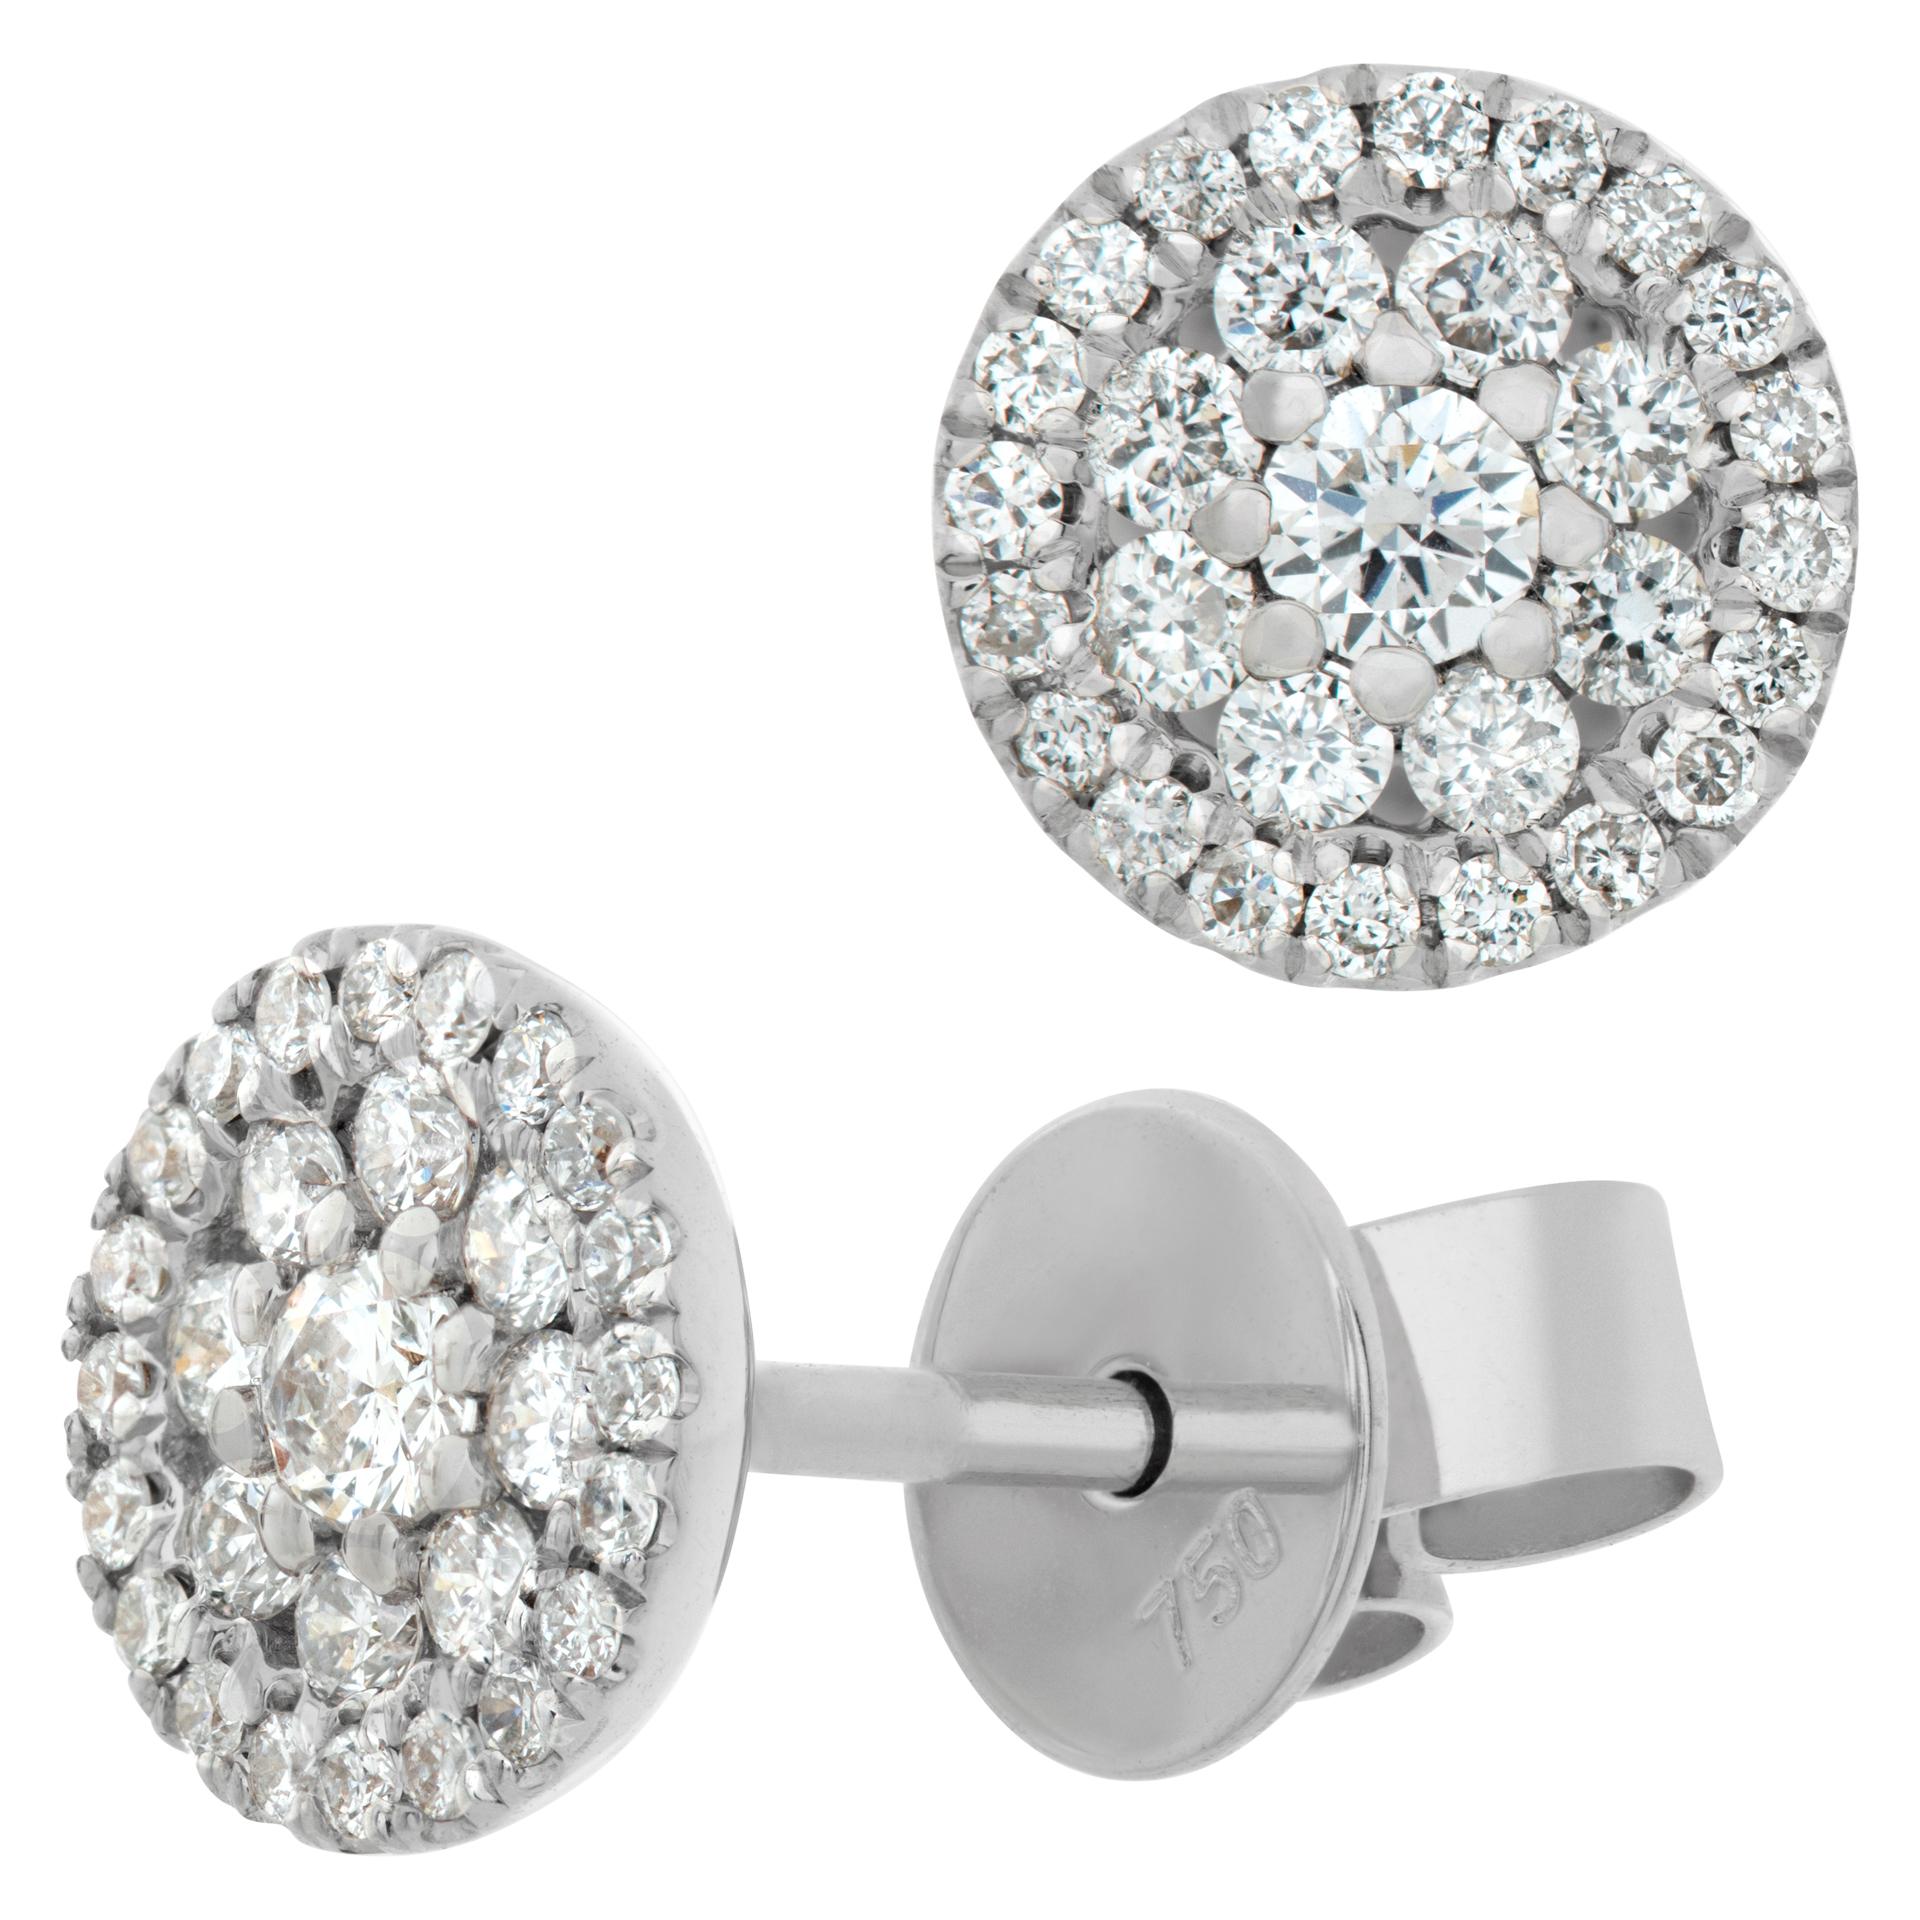 Sparkling 18k white gold stud earrings with 0.40 carats in a cluster of round diamonds G-H color, VS-SI clarity. Size 7mm x 7mm.
